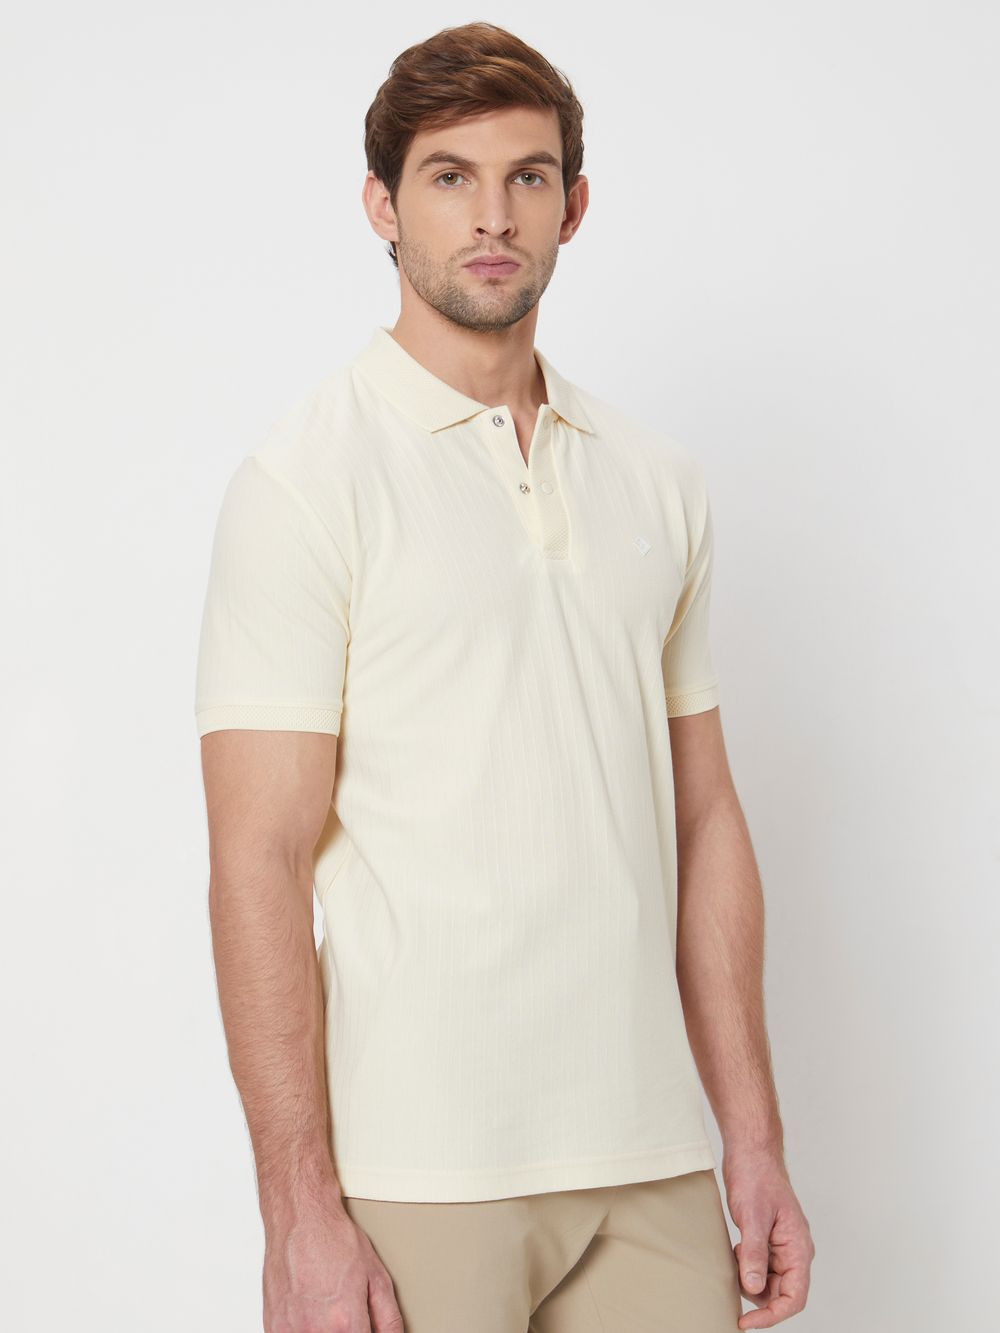 Off White Textured Plain Slim Fit Jersey Polo T-Shirt